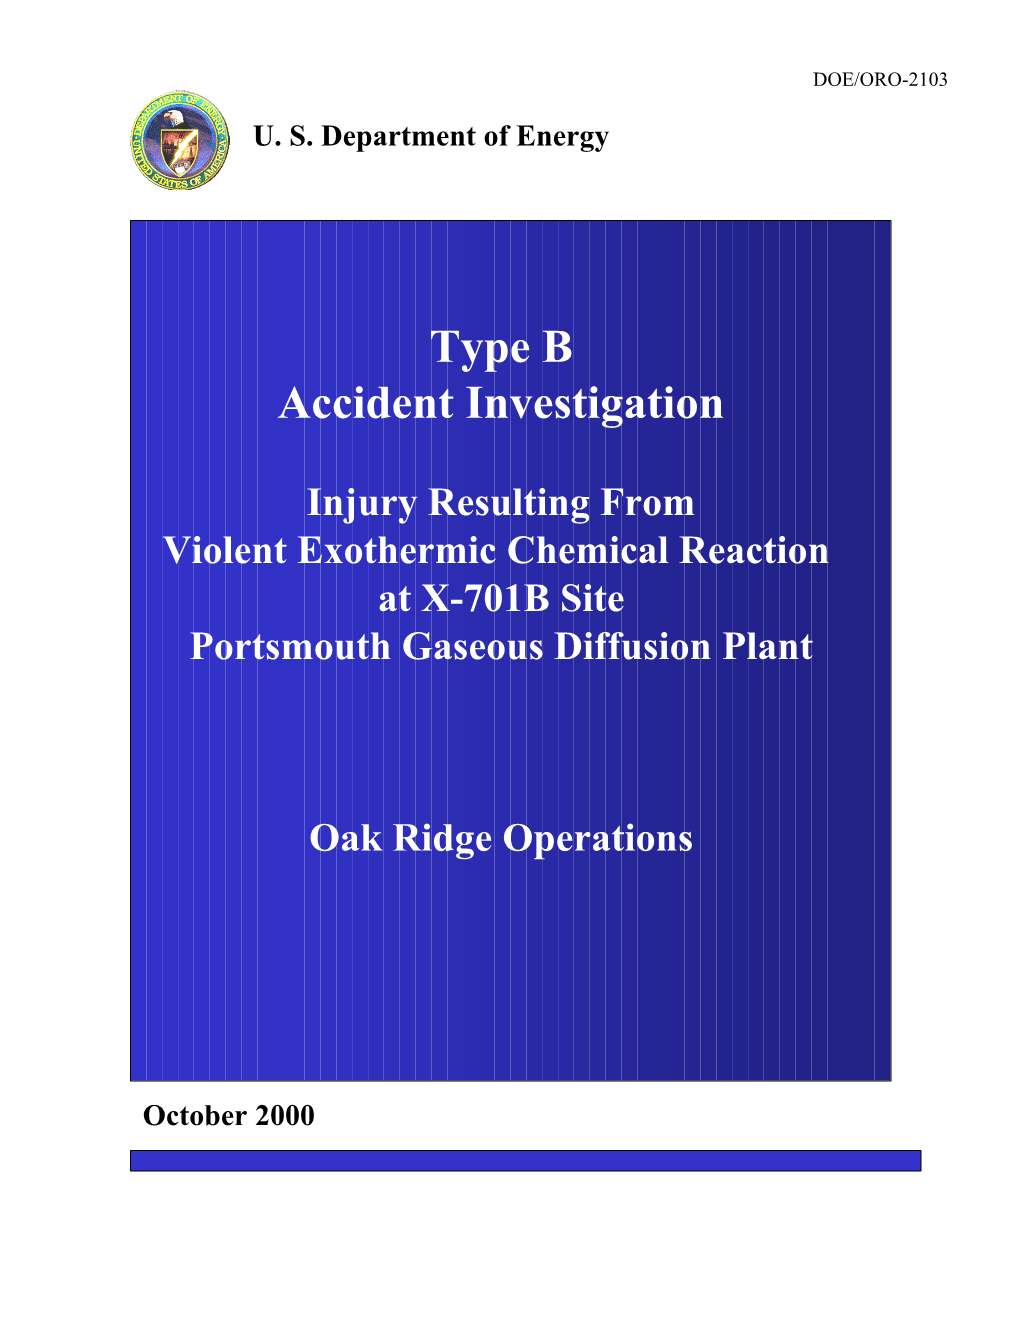 Type B Accident Investigation Injury Resulting from Violent Exothermic